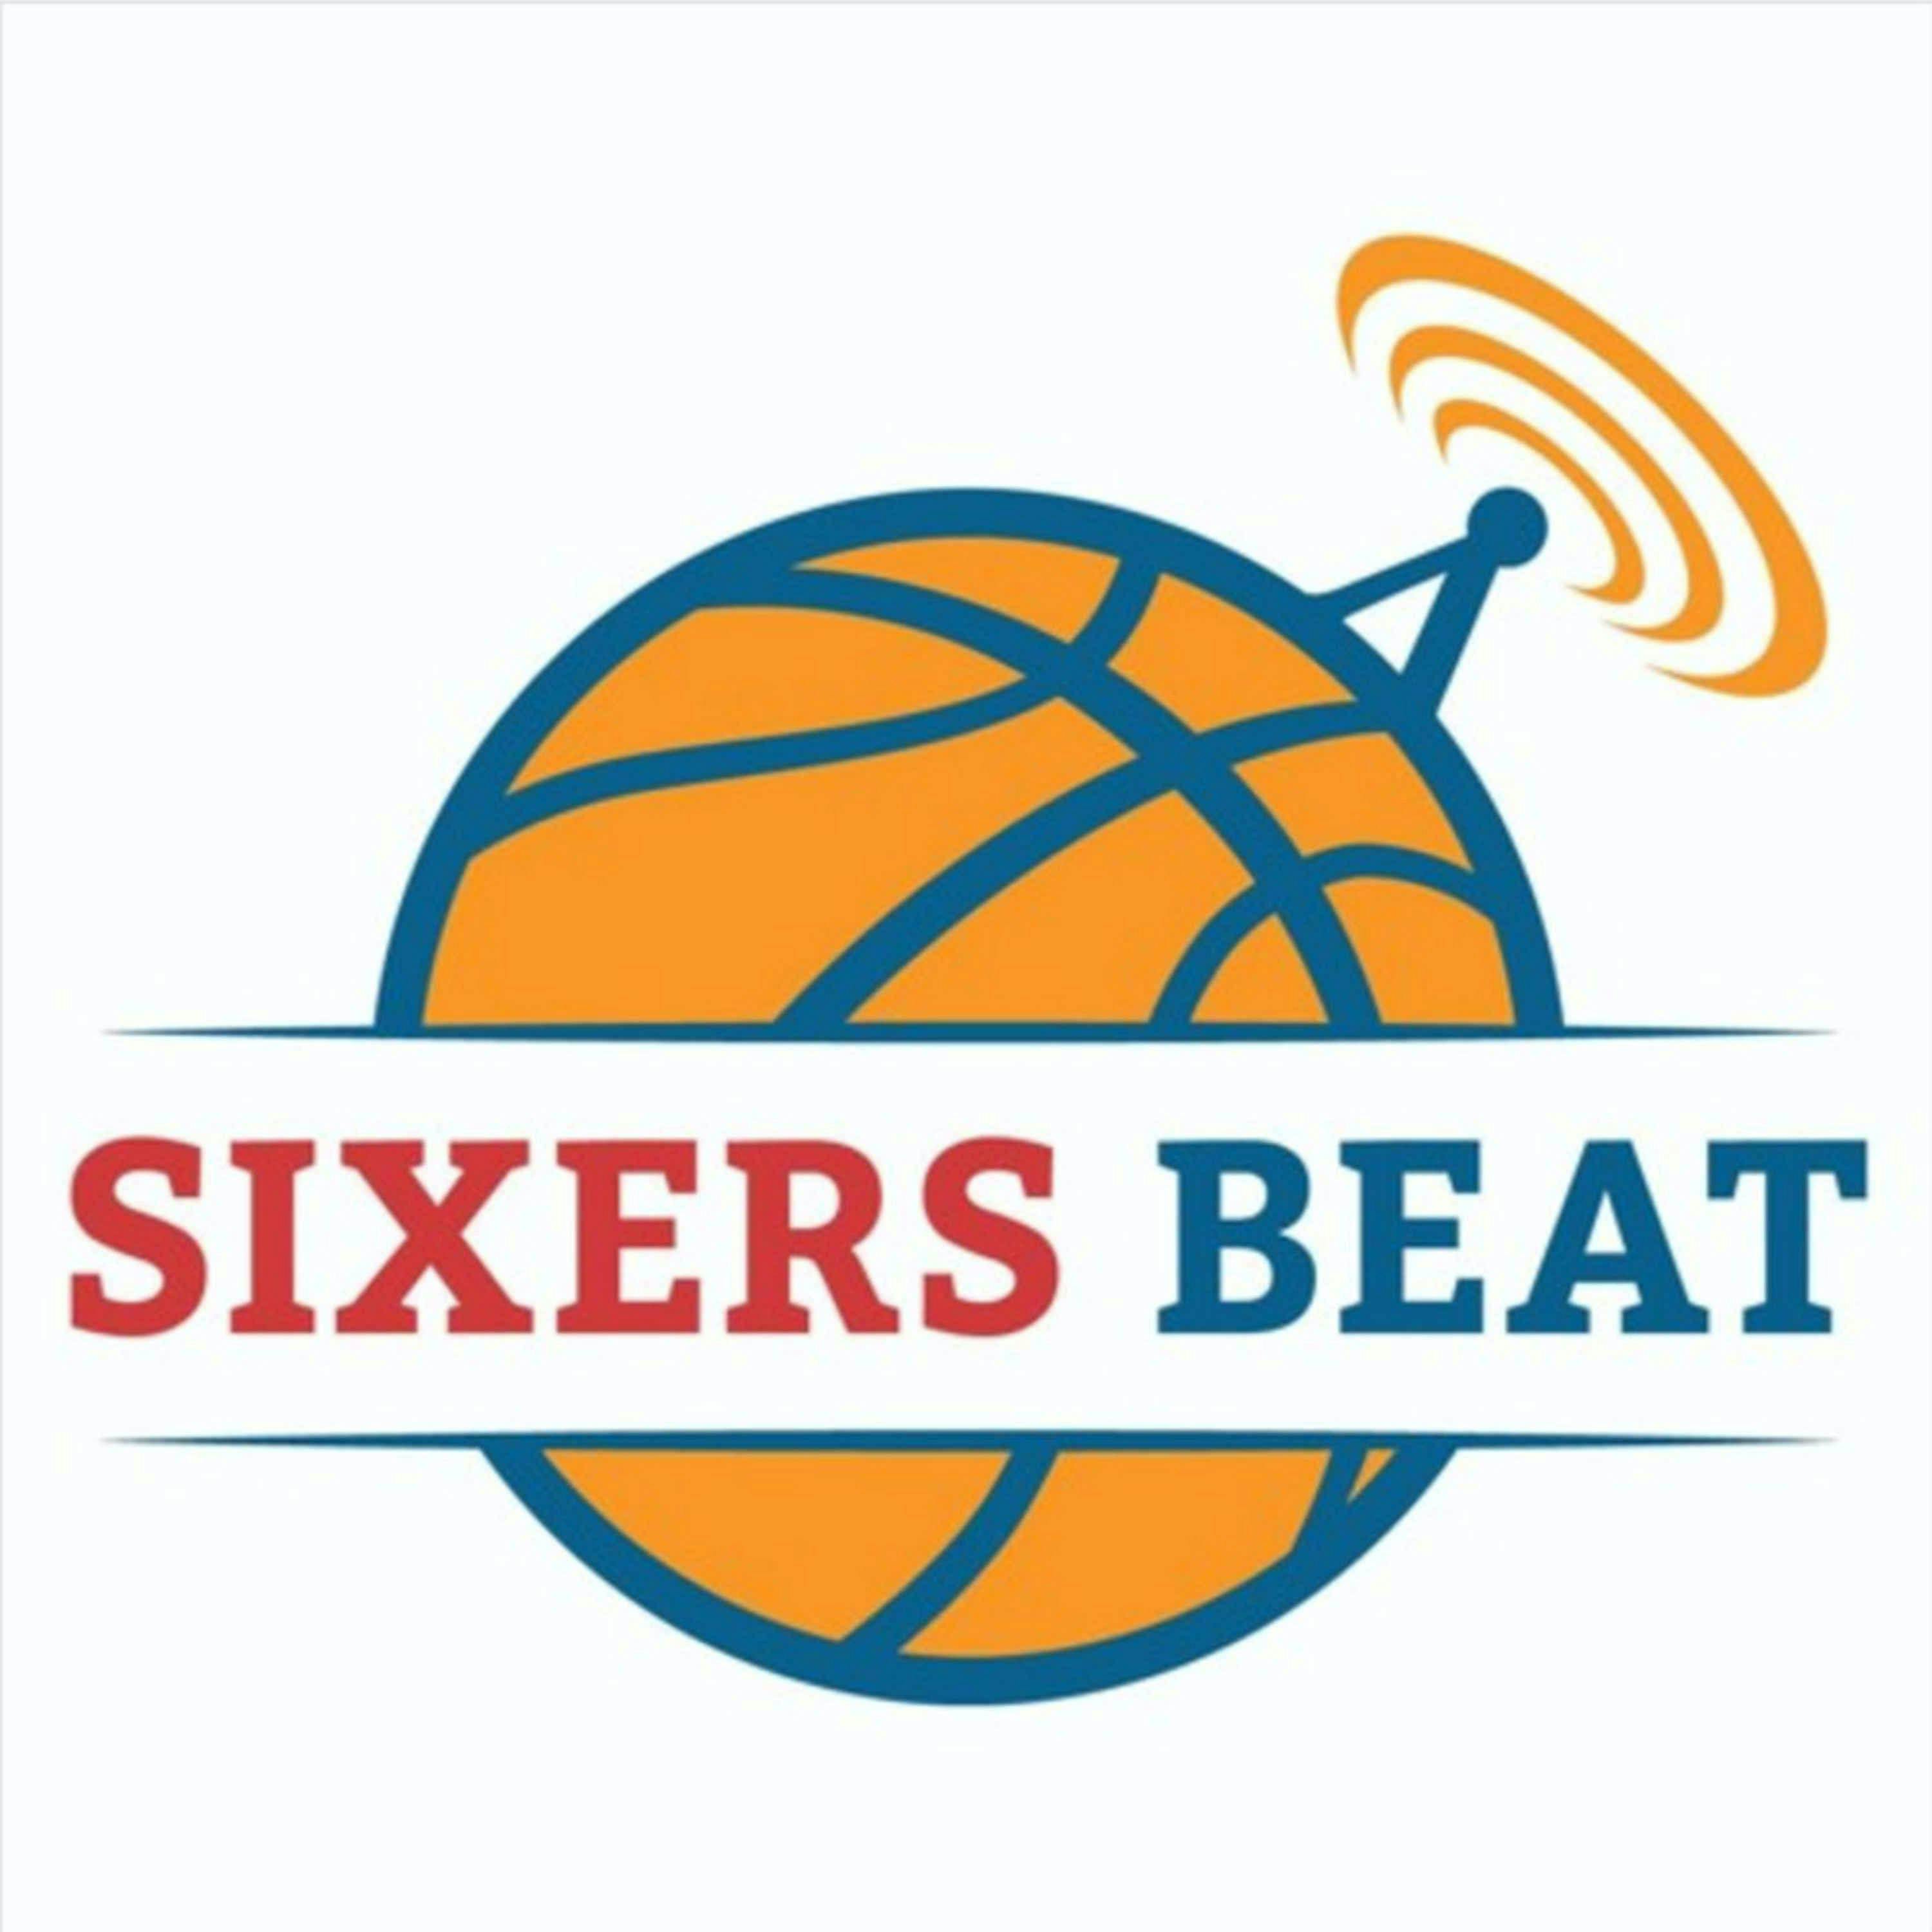 #190 - All things 76ers with Kyle Neubeck